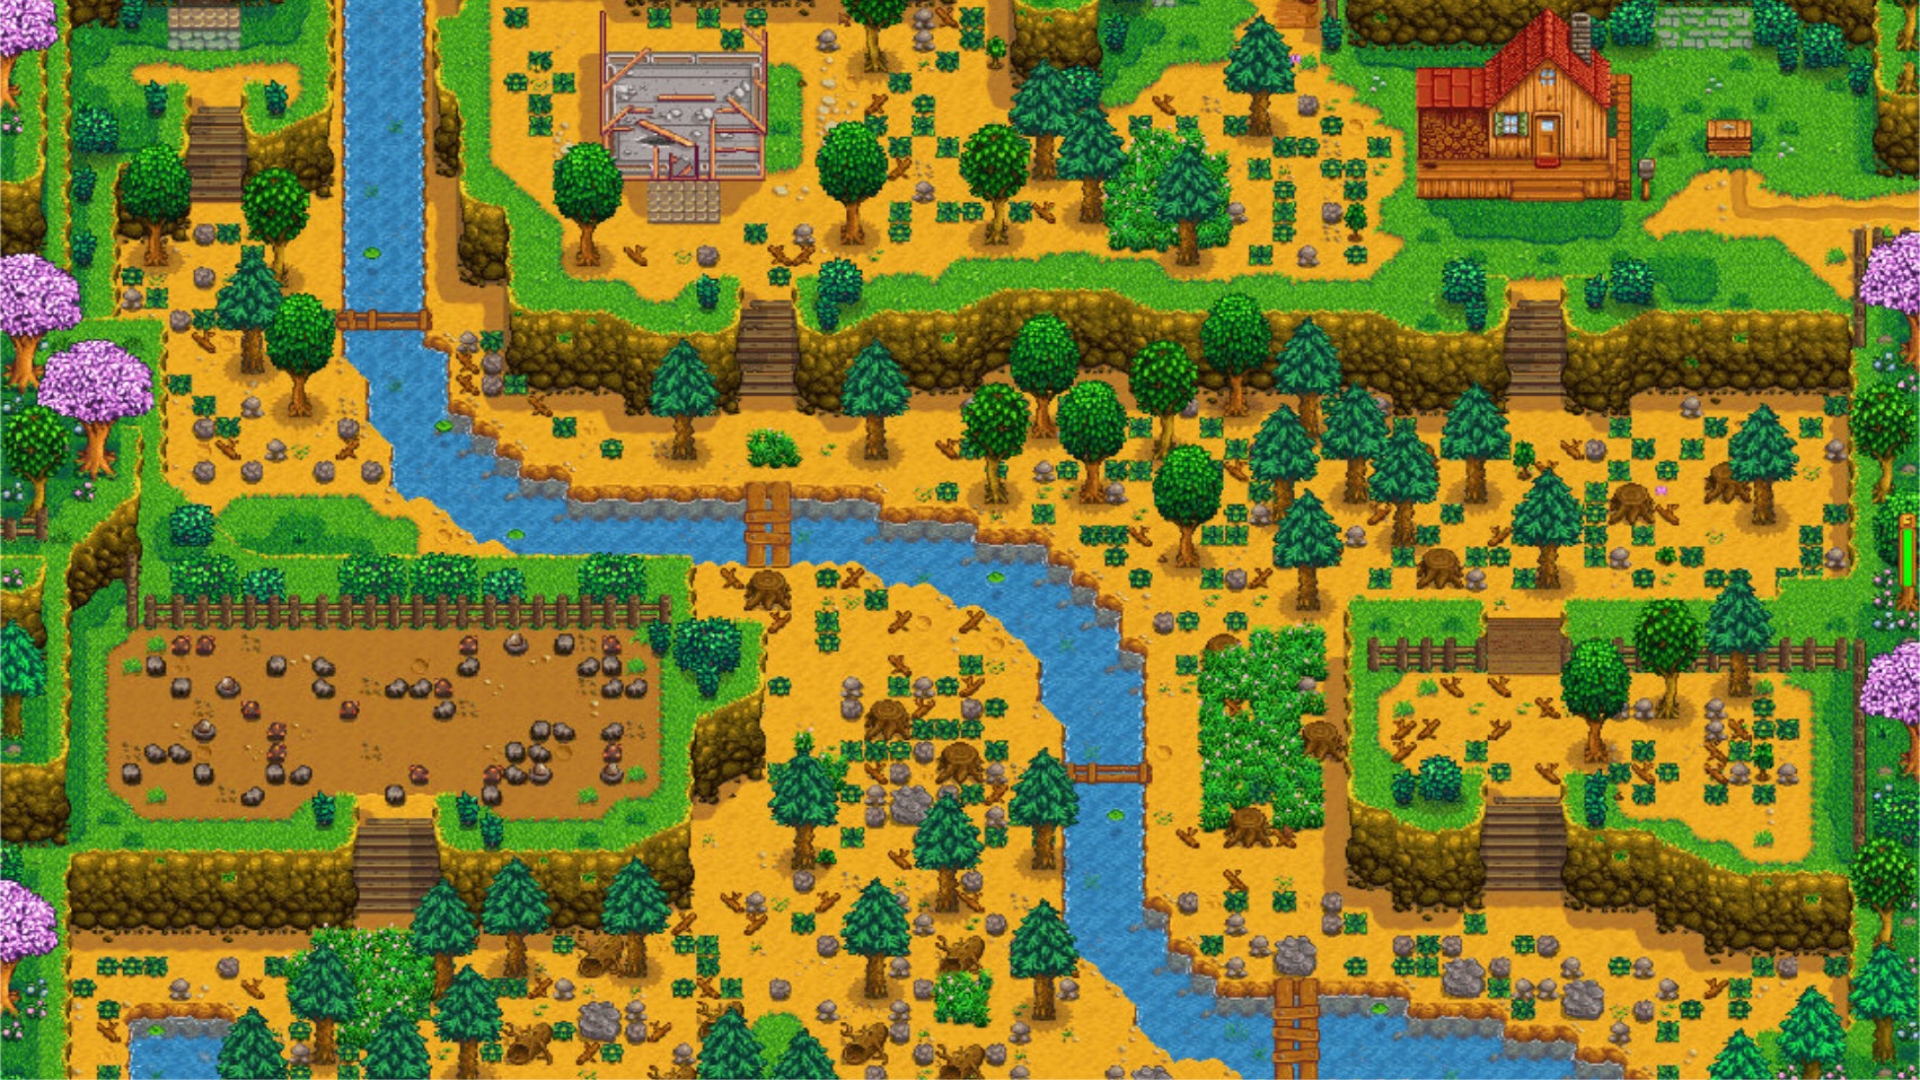 A view of the Stardew Valley hill-top map